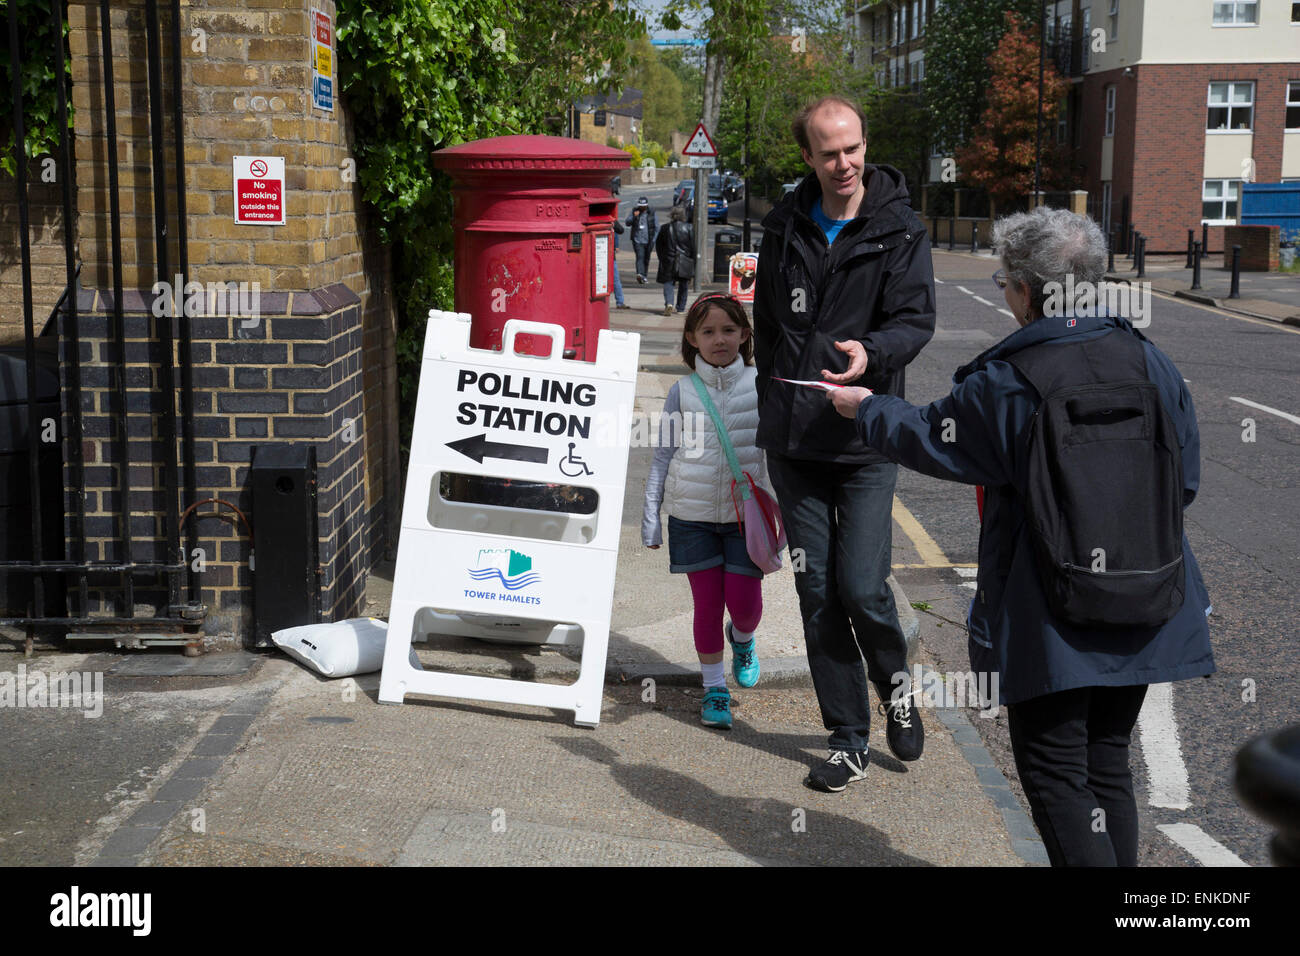 London, UK. Thursday 7th May 2015. Voters attending a polling station at St Peter's London Docks Primary School in the constituency of  Poplar and Limehouse in East London on the day of the general election. This is a Labour Party seat, although this electin is set to be one of the most hotly contested in a generation. Stock Photo